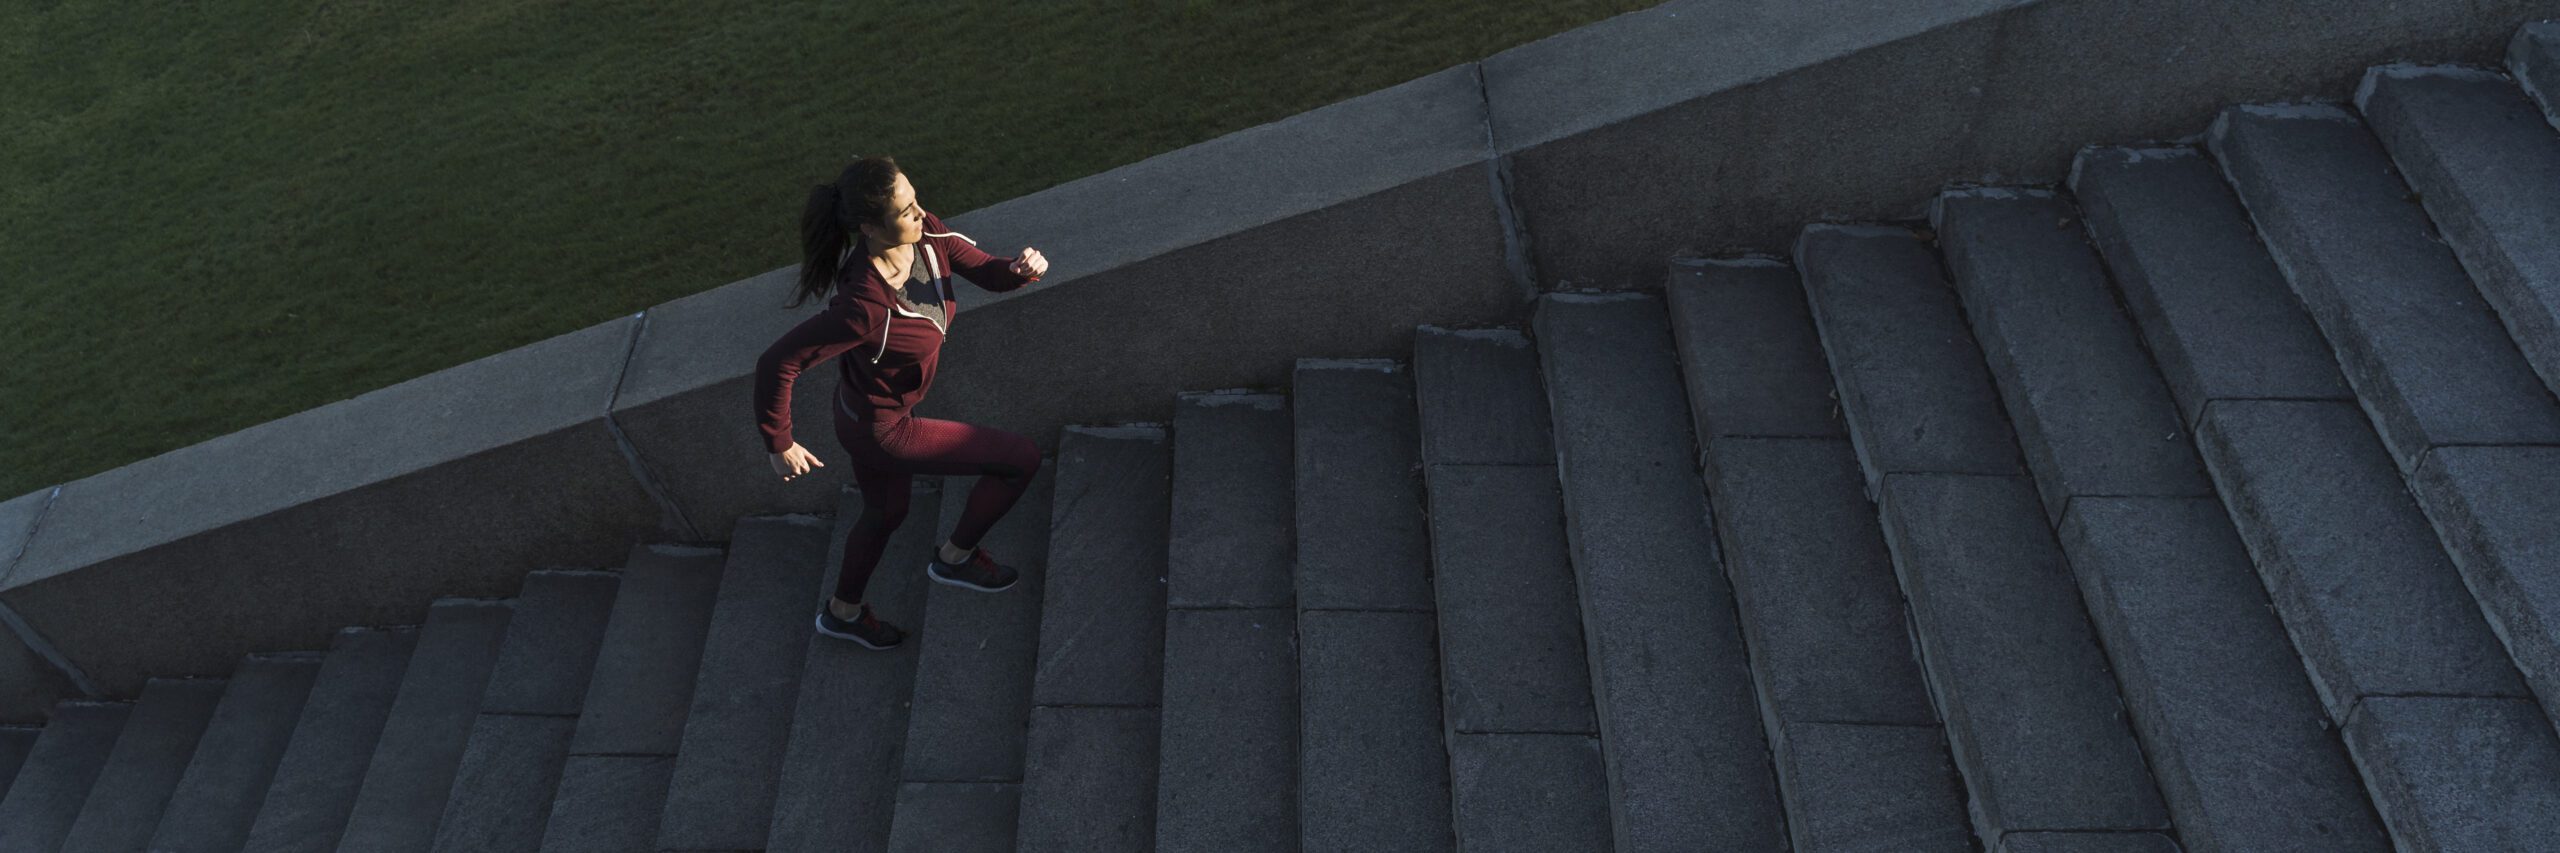 A woman in running clothes is climbing a set of concrete stairs as part of her fitness routine.